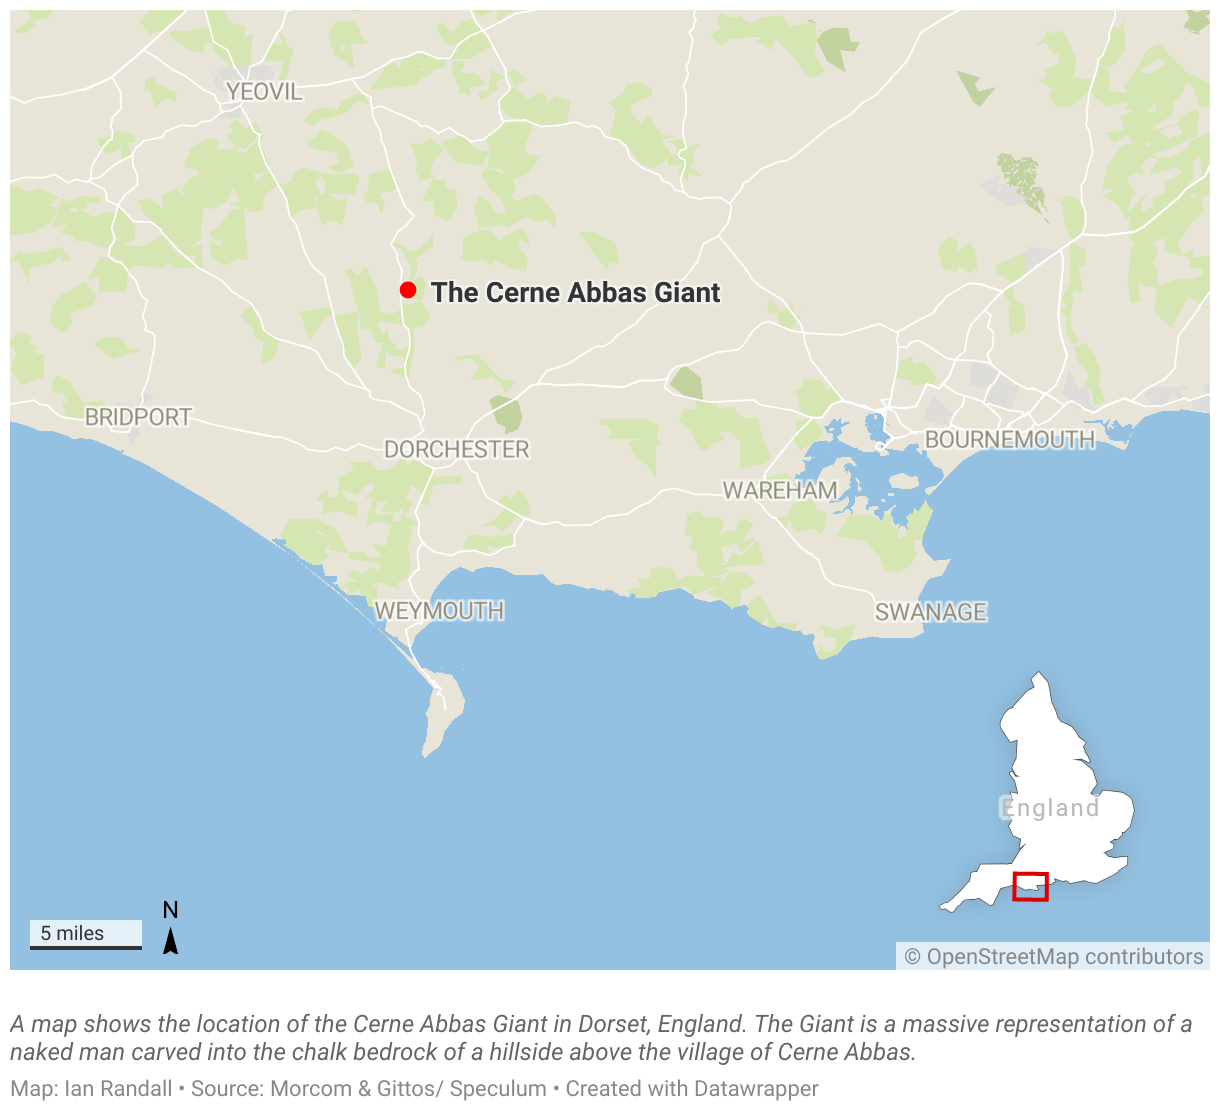 A map shows the location of the Cerne Abbas Giant in Dorset, England.